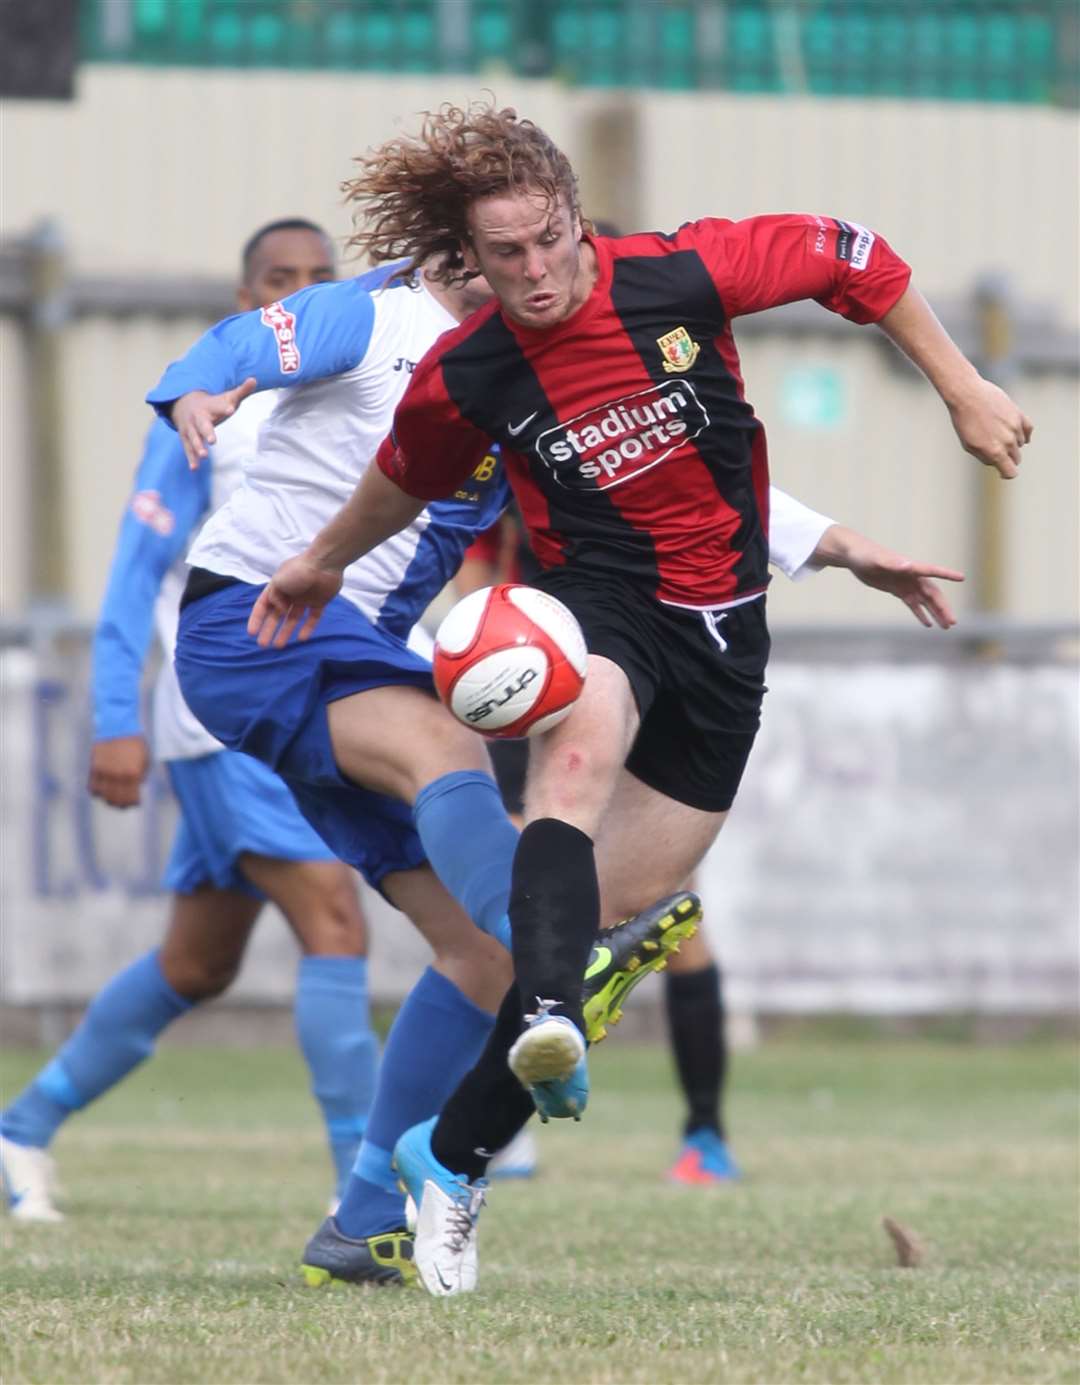 Nick Treadwell in action during his first spell at Sittingbourne, the 2012/13 season under Jim and Danny Ward Picture: John Westhrop